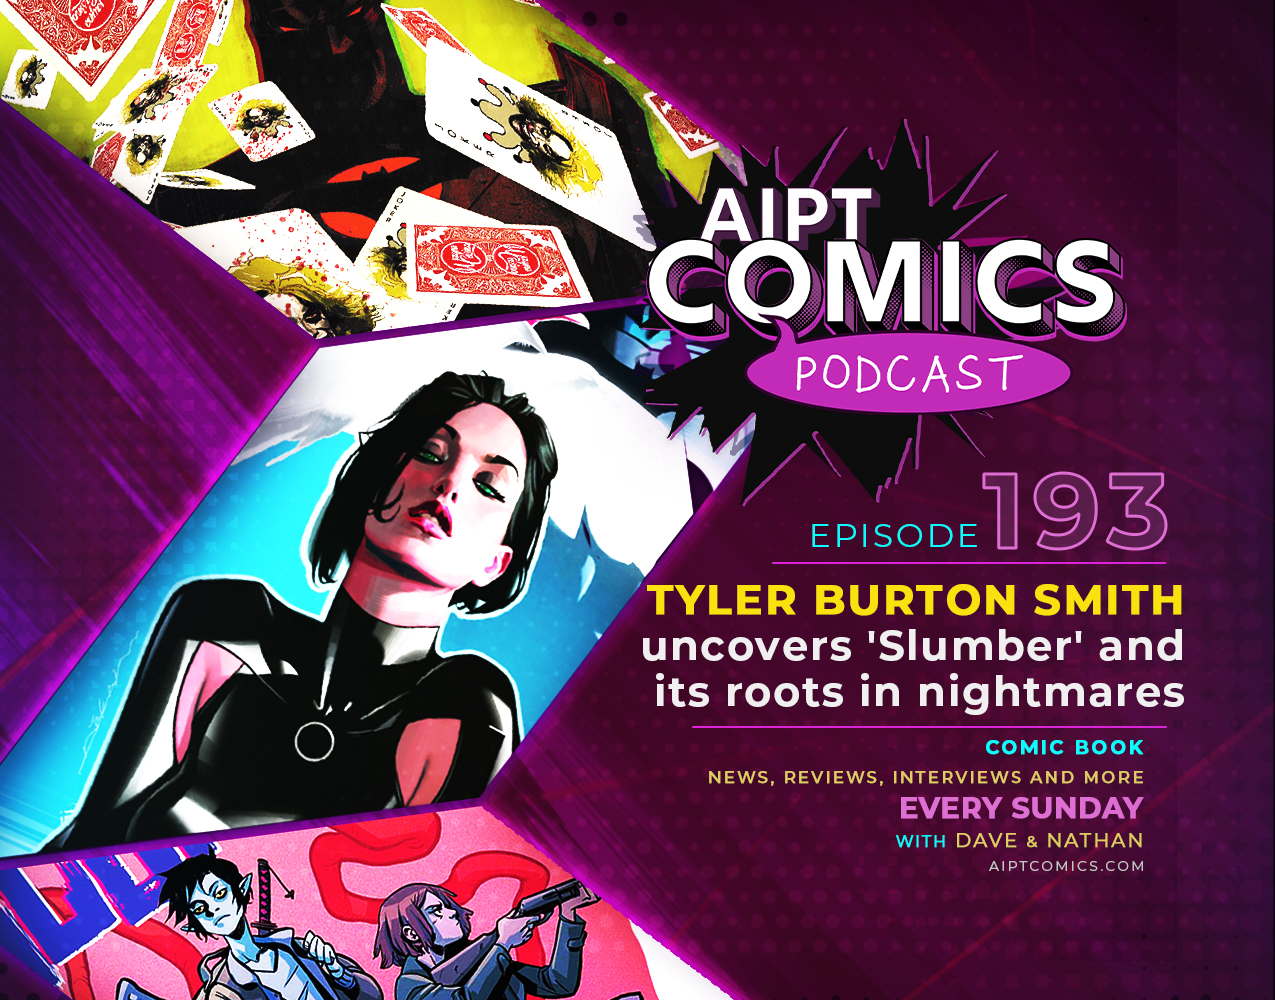 AIPT Comics podcast episode 193: Tyler Burton Smith uncovers 'Slumber' and its roots in nightmares